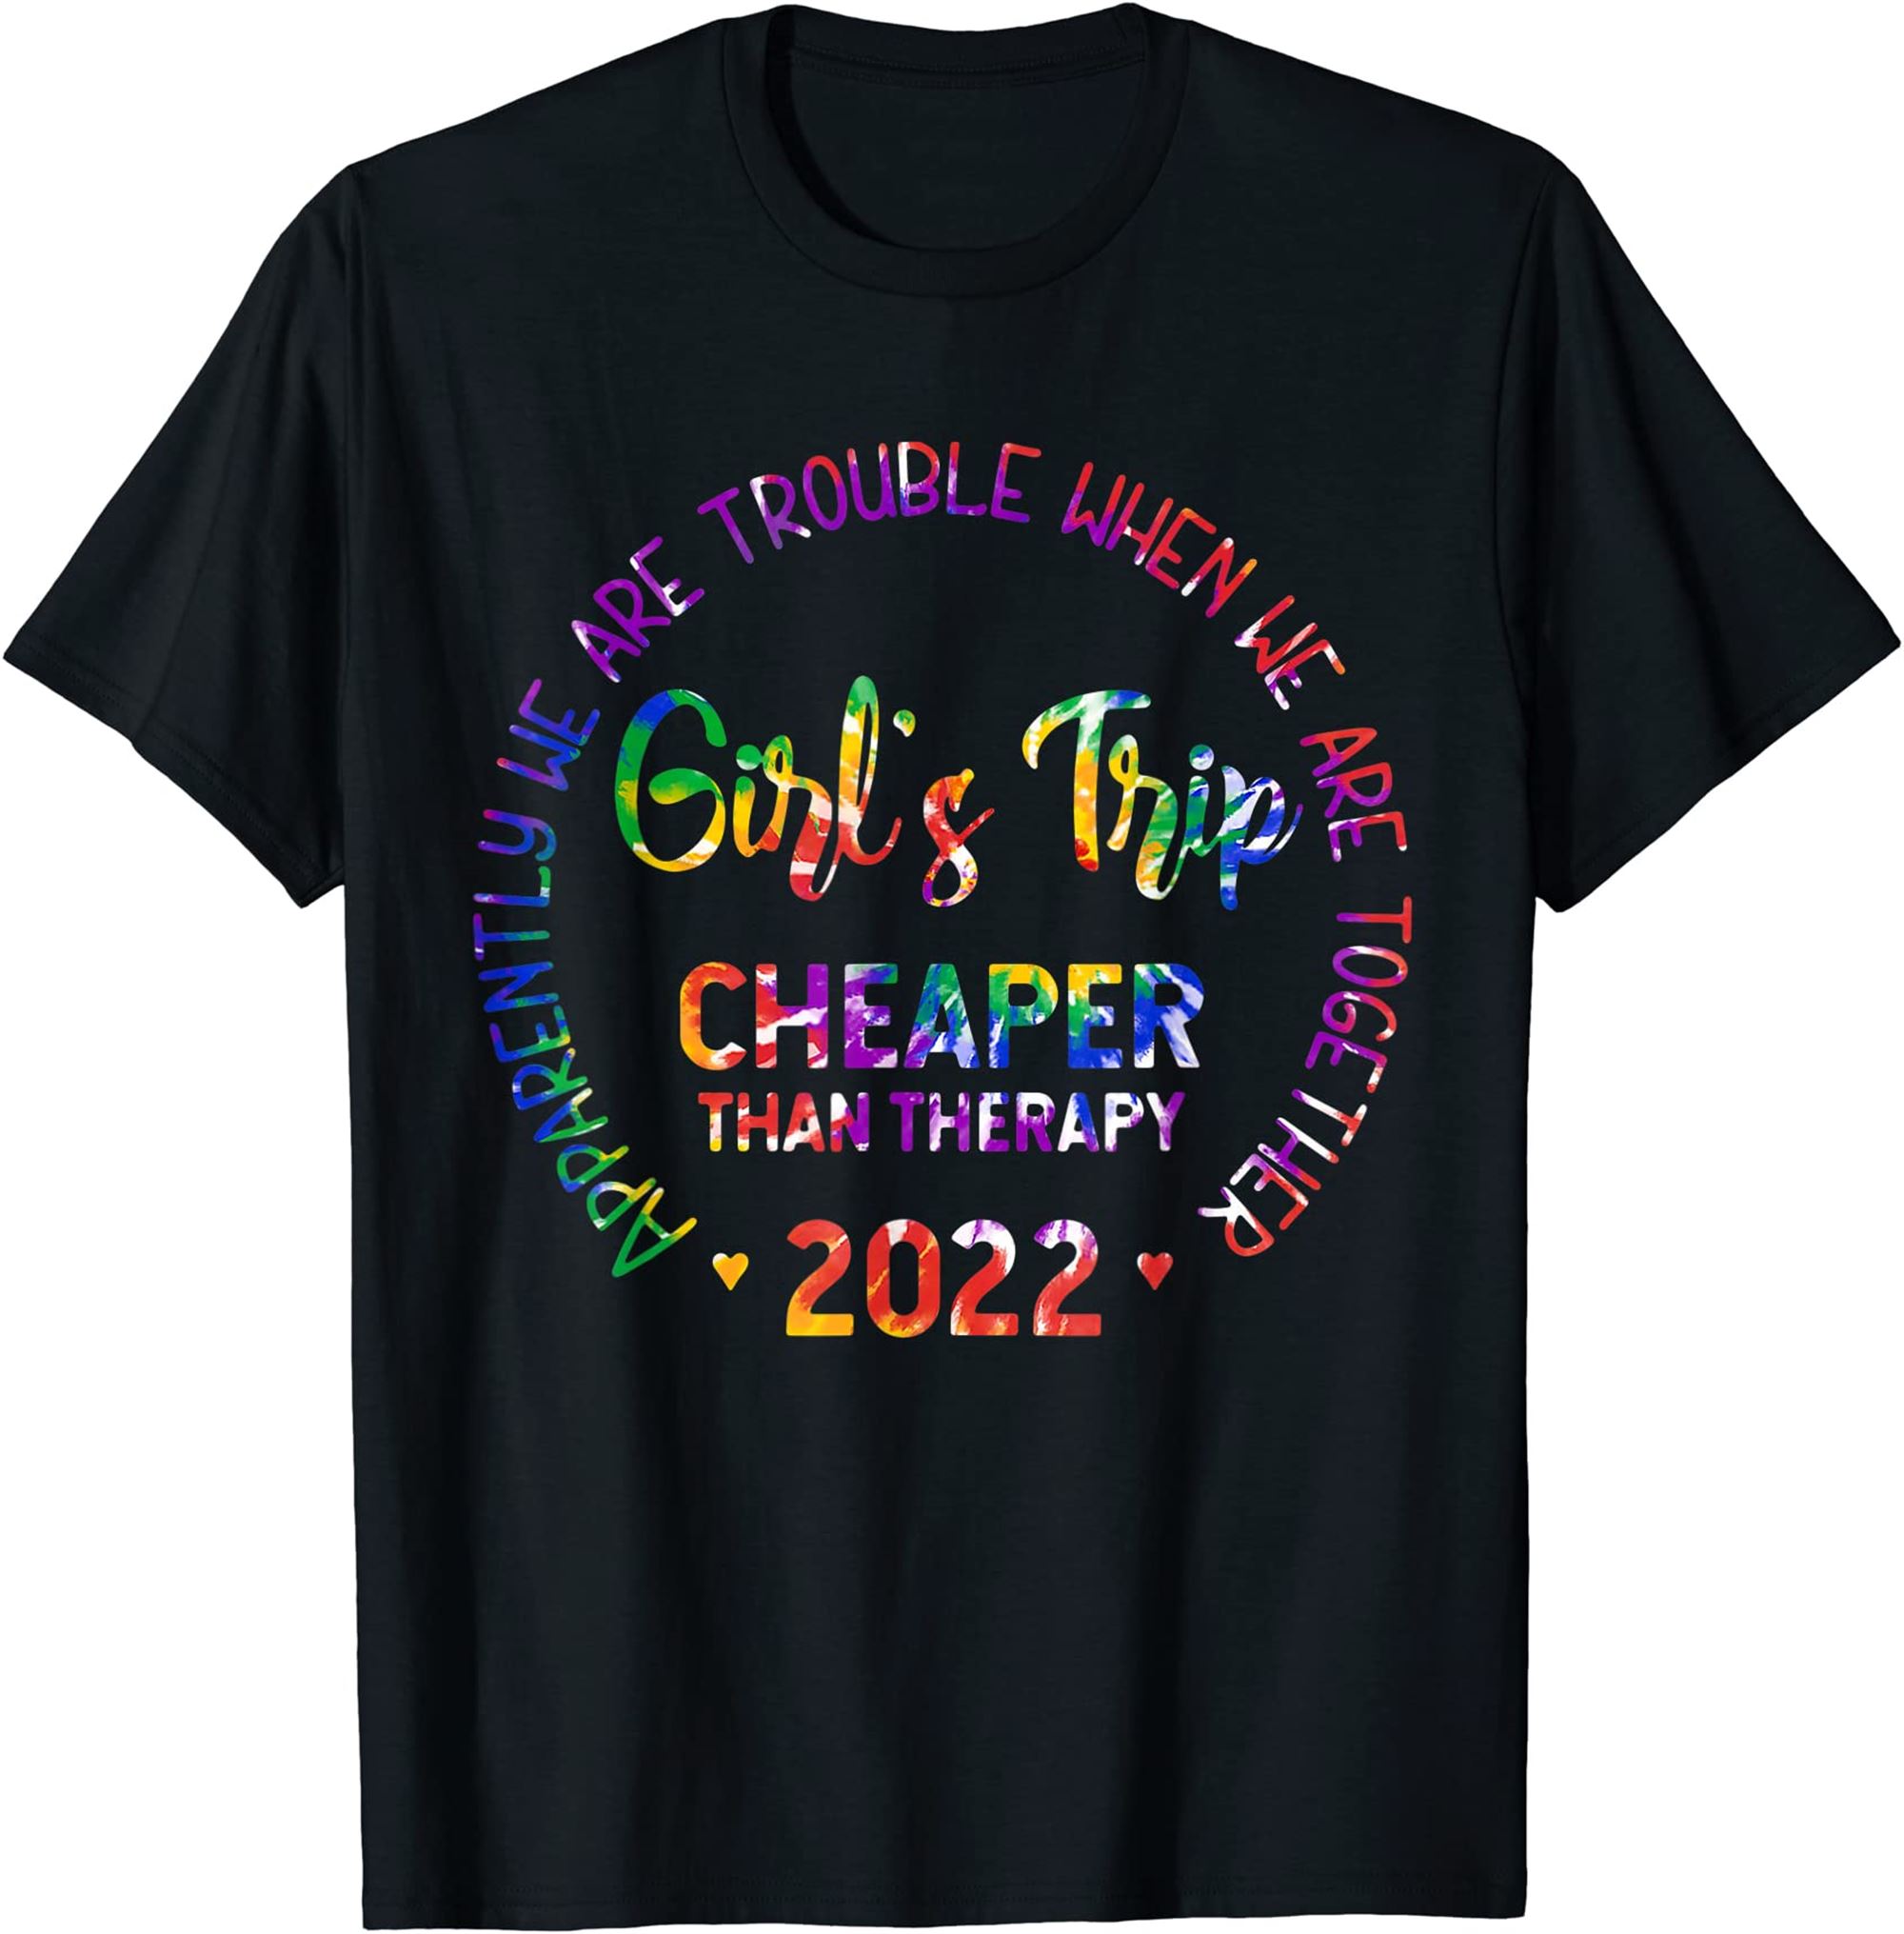 Girls Trip Cheaper Than A Therapy Tie Dye Girls Weekend 2022 Tshirt Full Size Up To 5xl